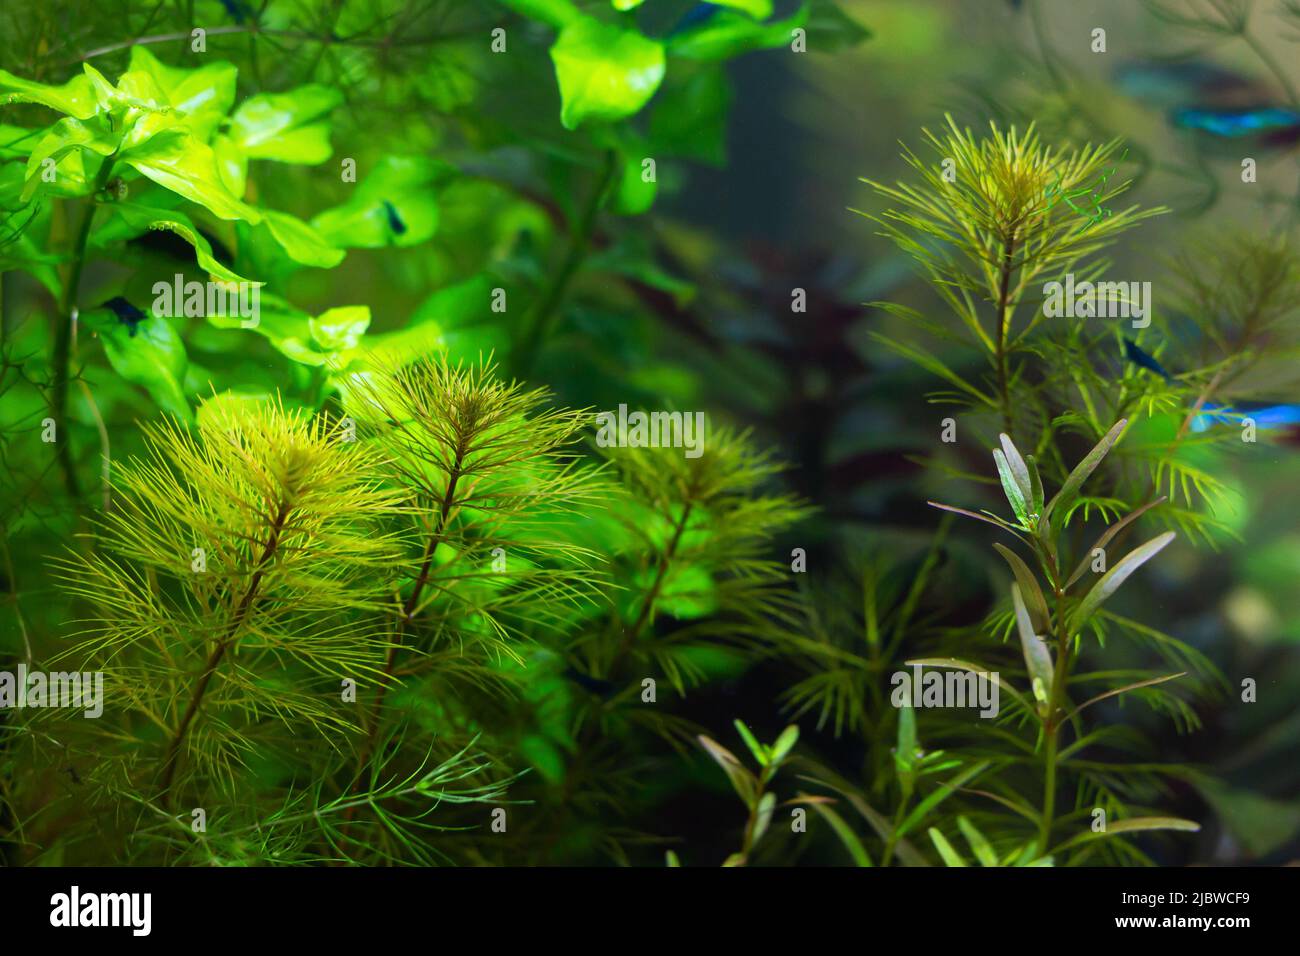 Beautiful tropical freshwater aquarium with plants and moss Stock Photo